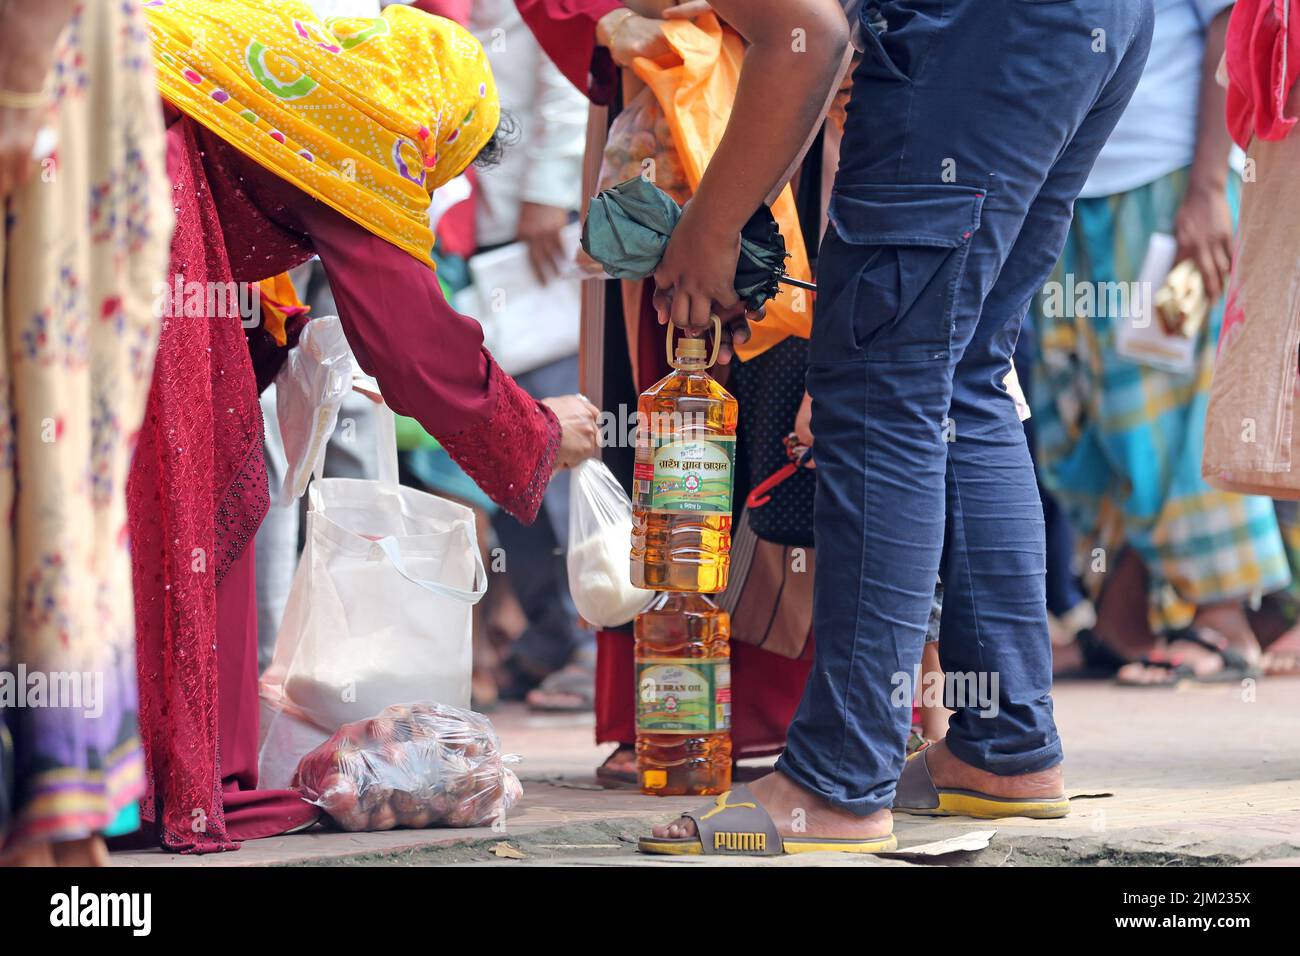 Overcrowding of people at the TCB biponon kendra [food sell center] in Ward No. 10 of Motijheel in the capital to collect products,Bangladesh. As the Stock Photo